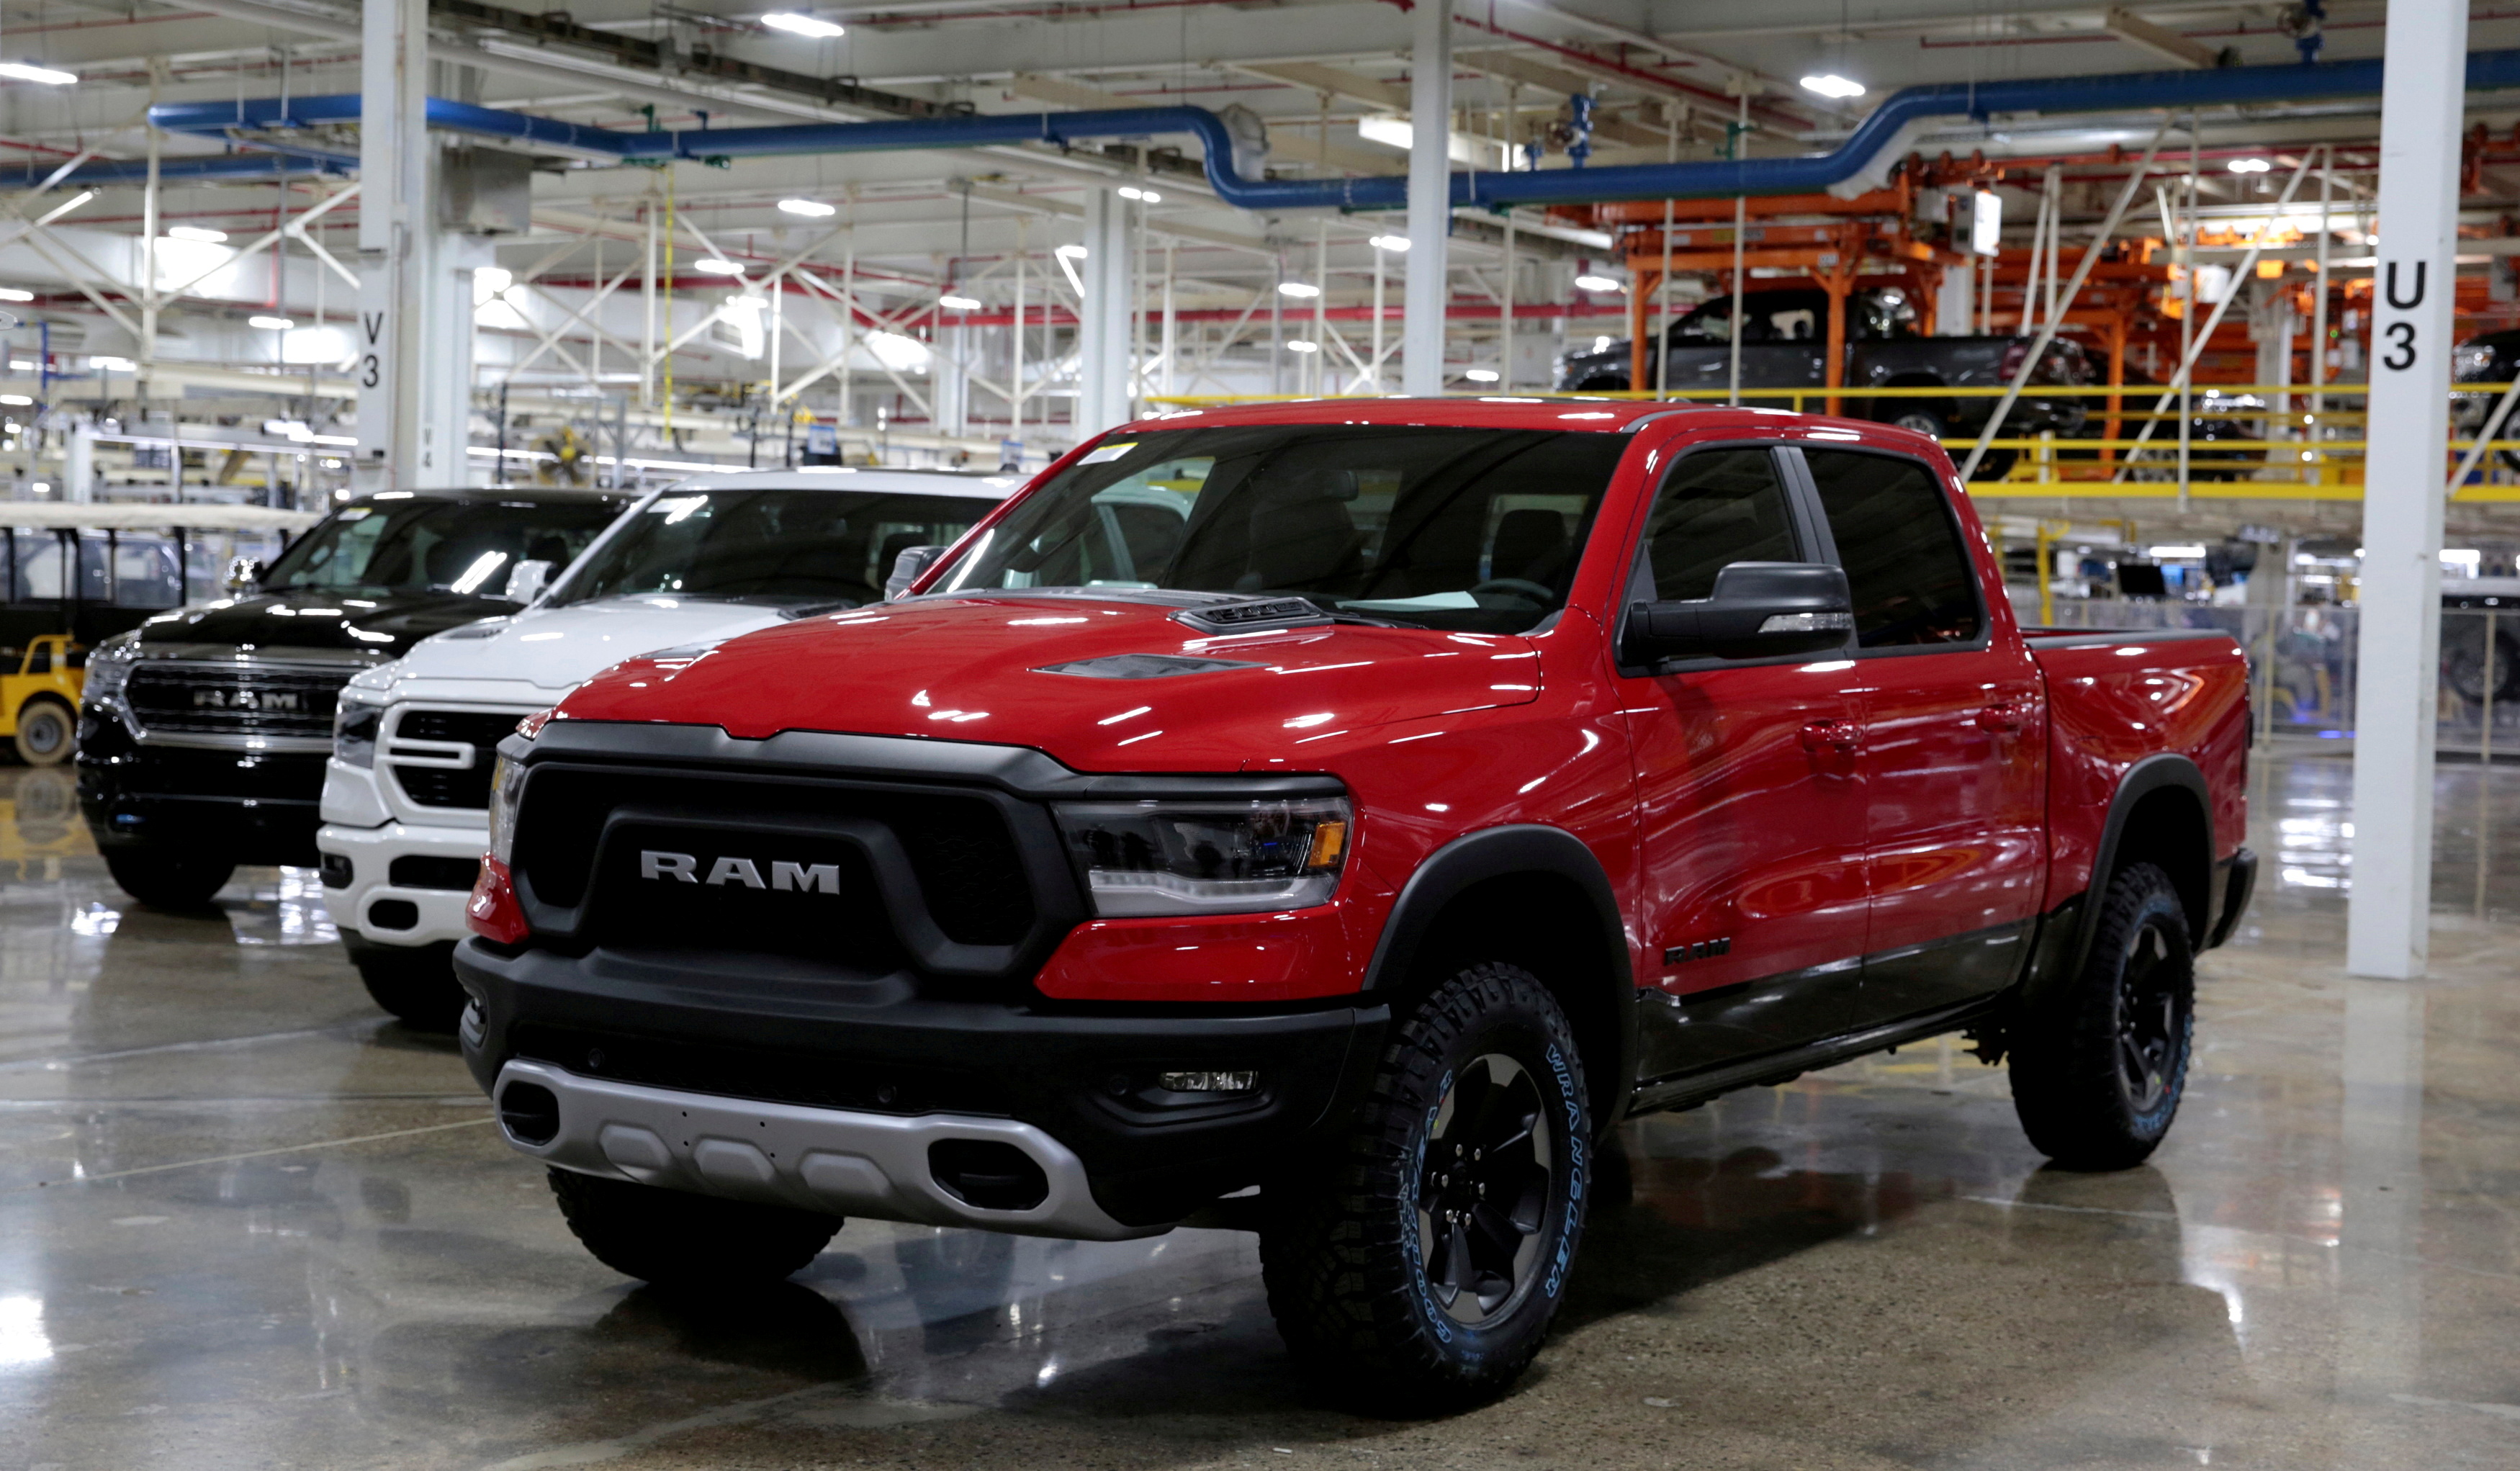 FILE PHOTO: Ram pickup trucks are on display at the FCA Sterling Heights Assembly Plant in Sterling Heights, Michigan